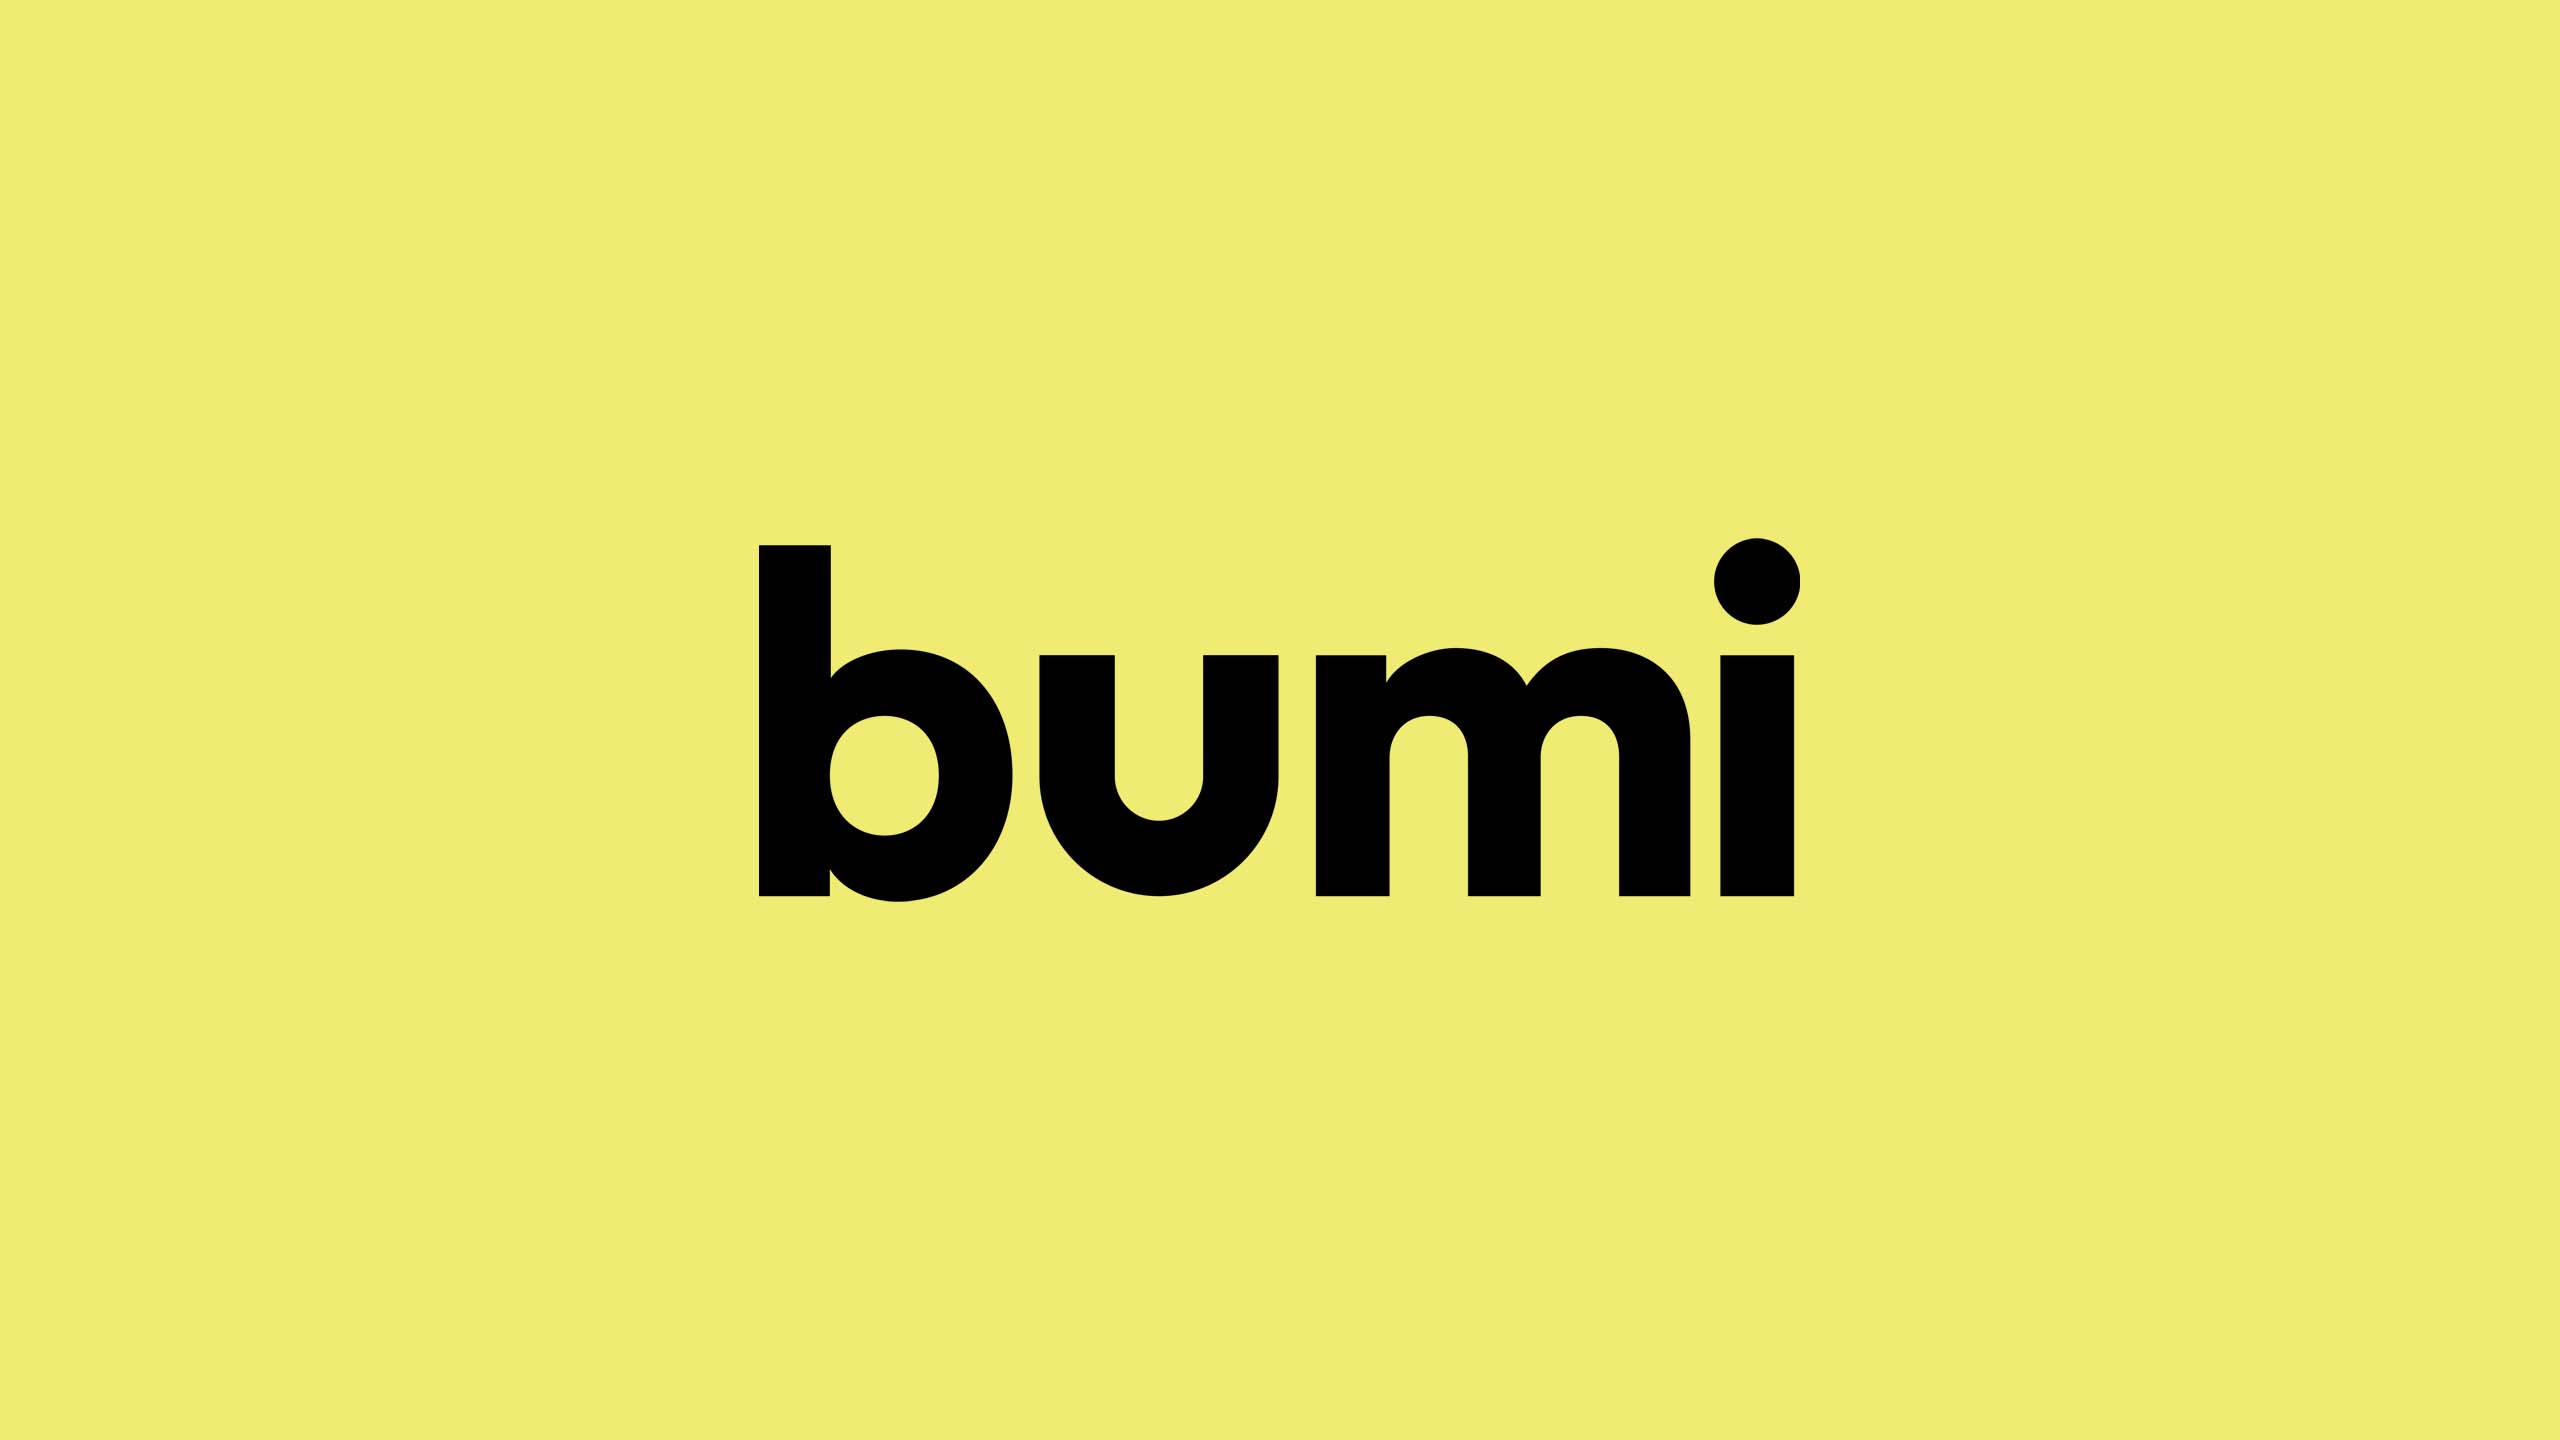 Friendly sans serif logo type for sustainable toothbrush brand Bumi